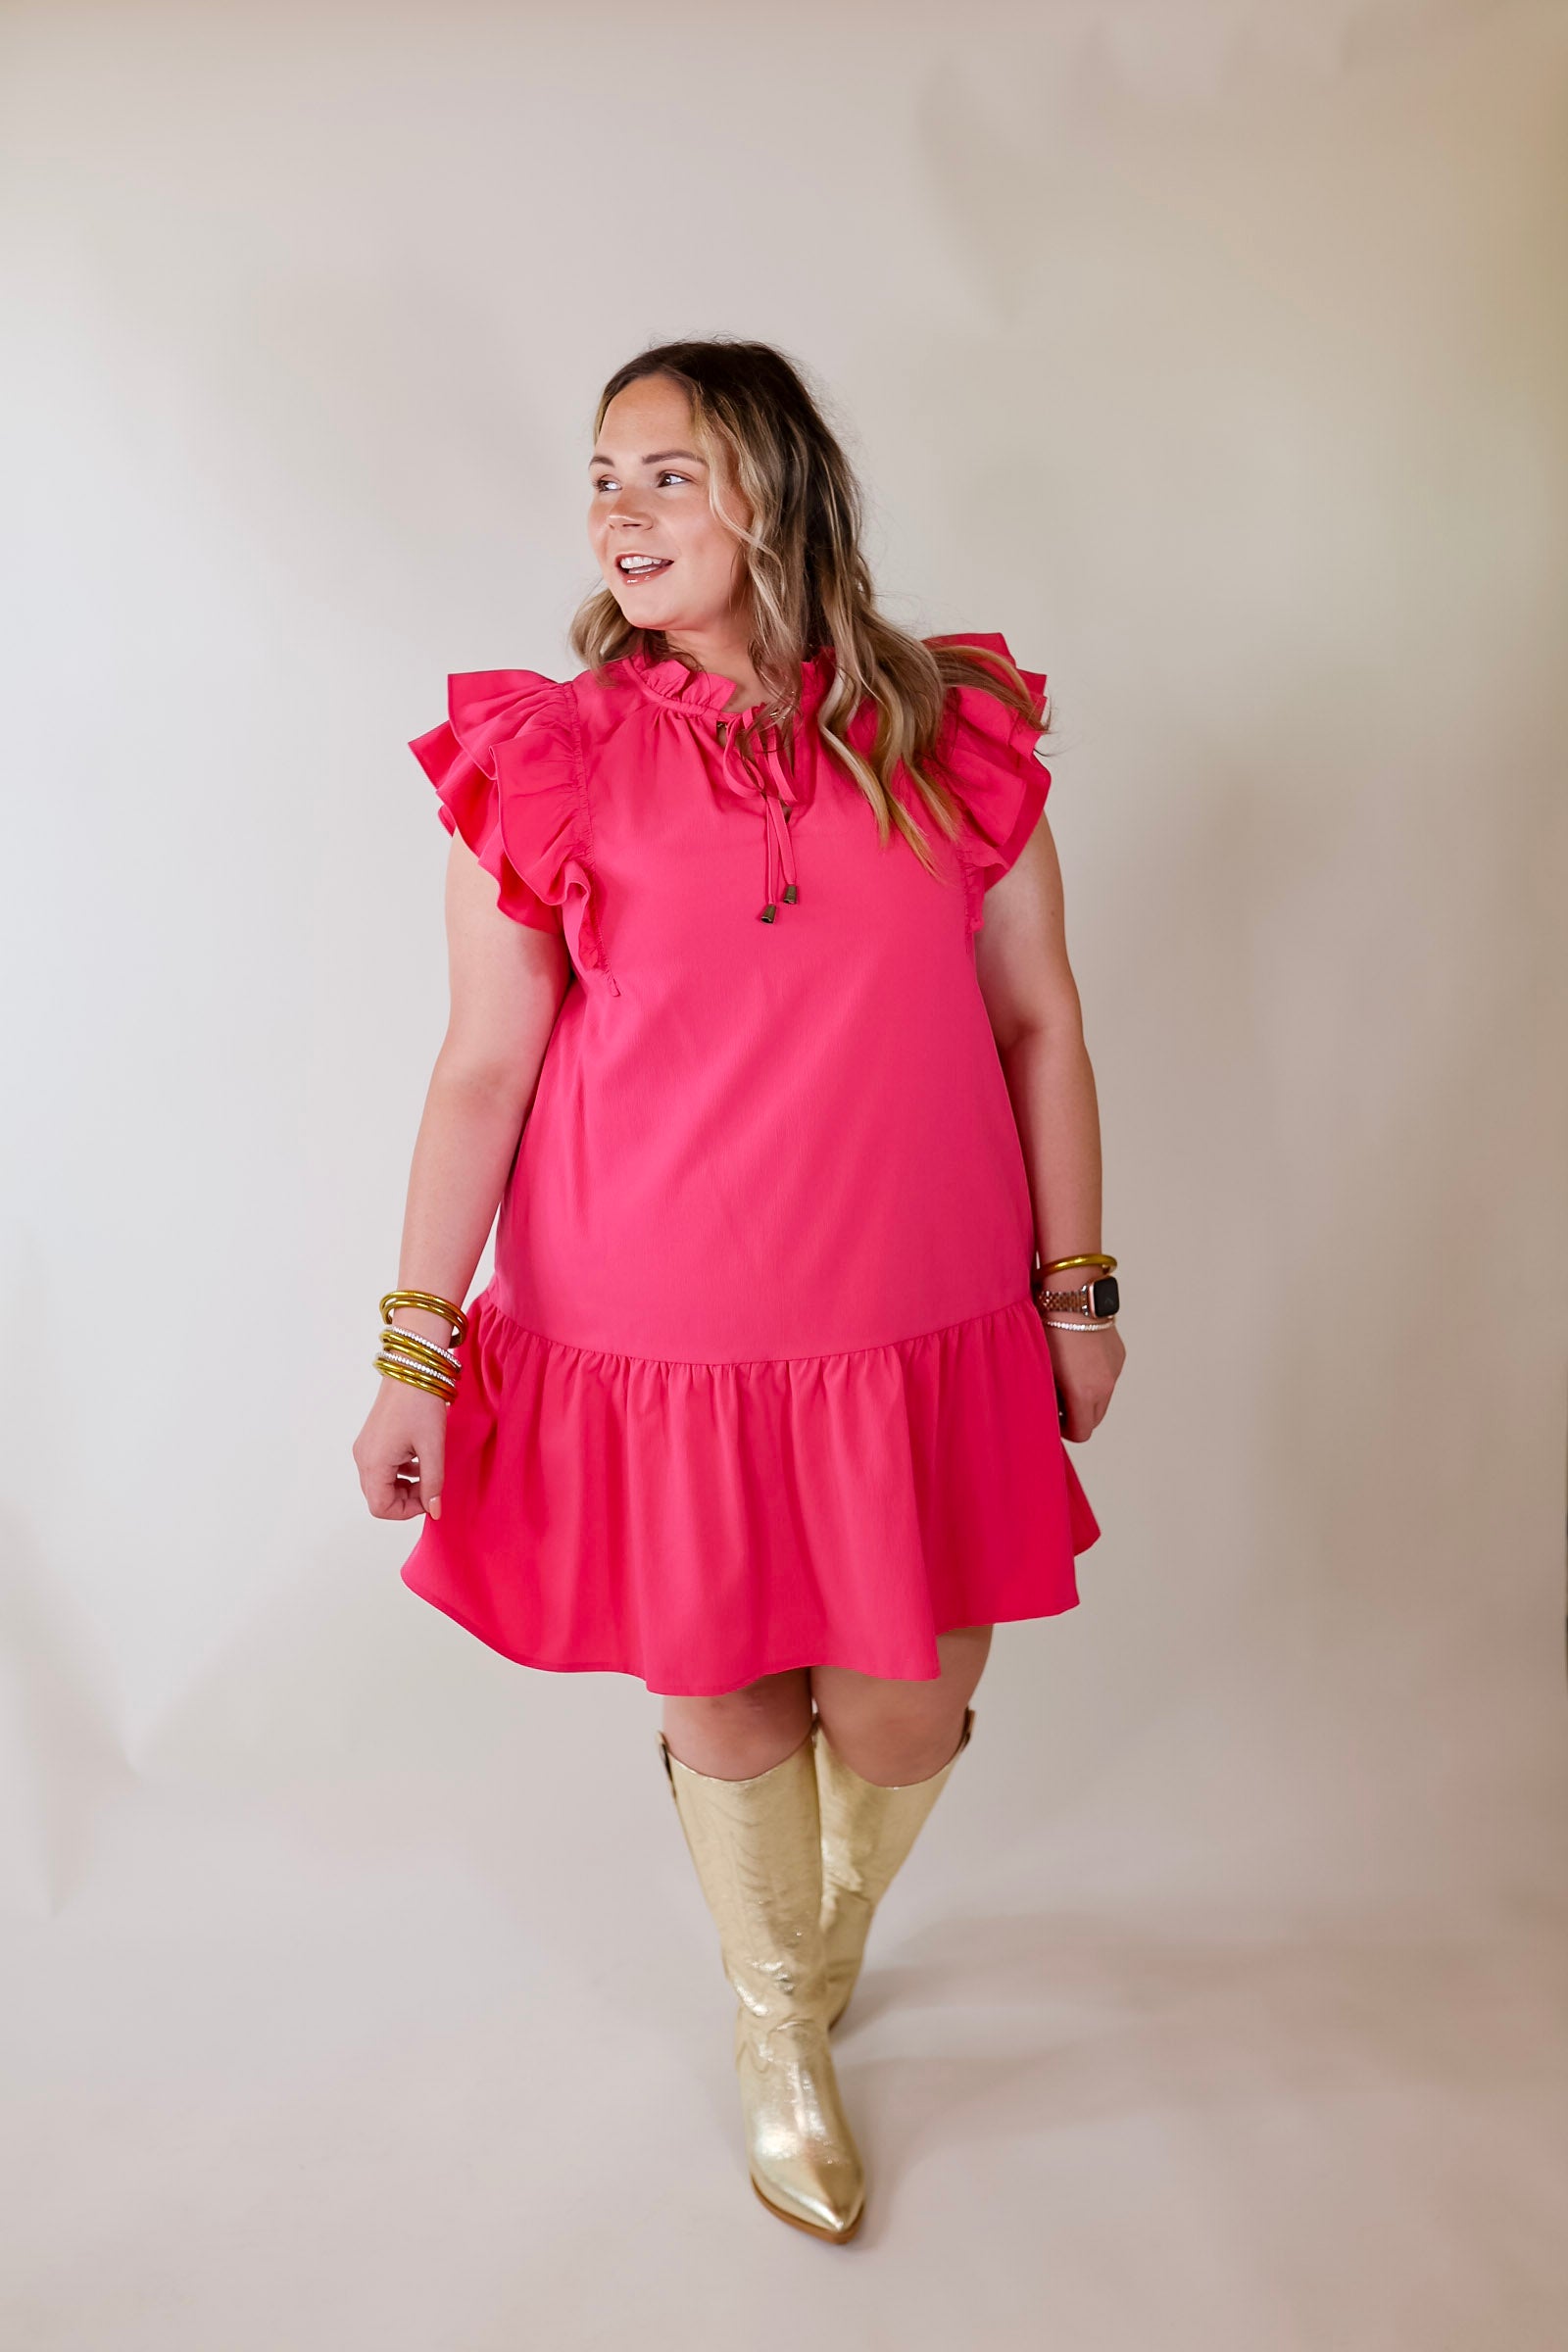 Powerful Love Ruffle Cap Sleeve Dress with Keyhole and Tie Neckline in Hot Pink - Giddy Up Glamour Boutique